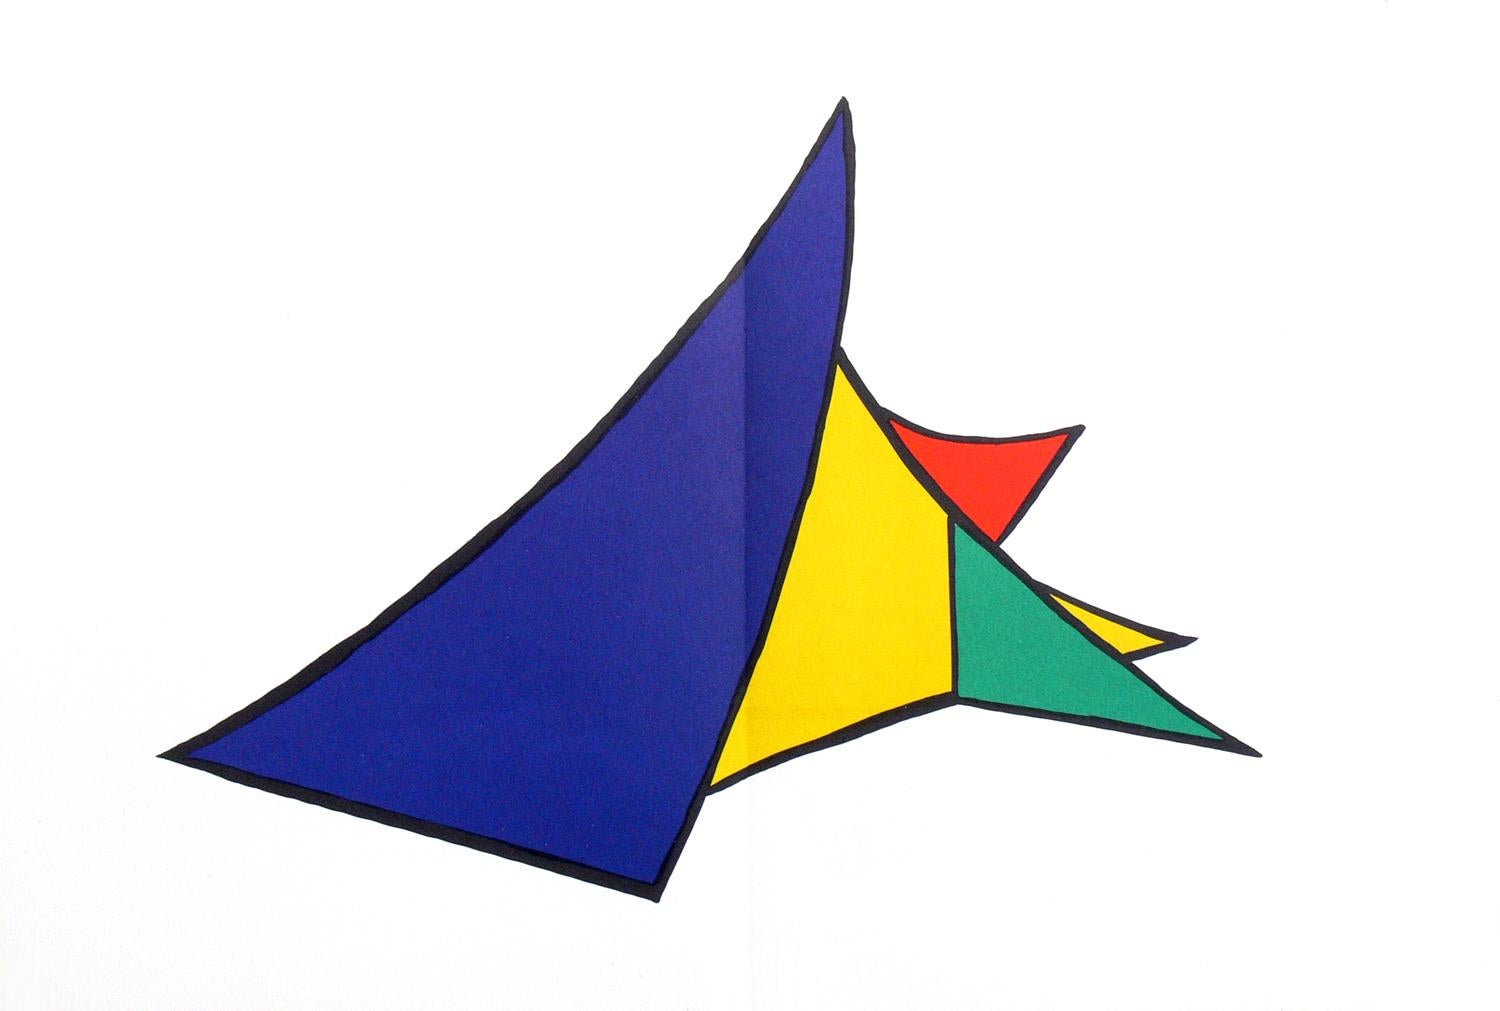 Selection of Alexander Calder color lithographs, France, circa 1960s. We purchased a group of these color lithographs from the estate of a couple that lived in France from 1951-1983. These are most likely from the limited edition folio “Derriere le